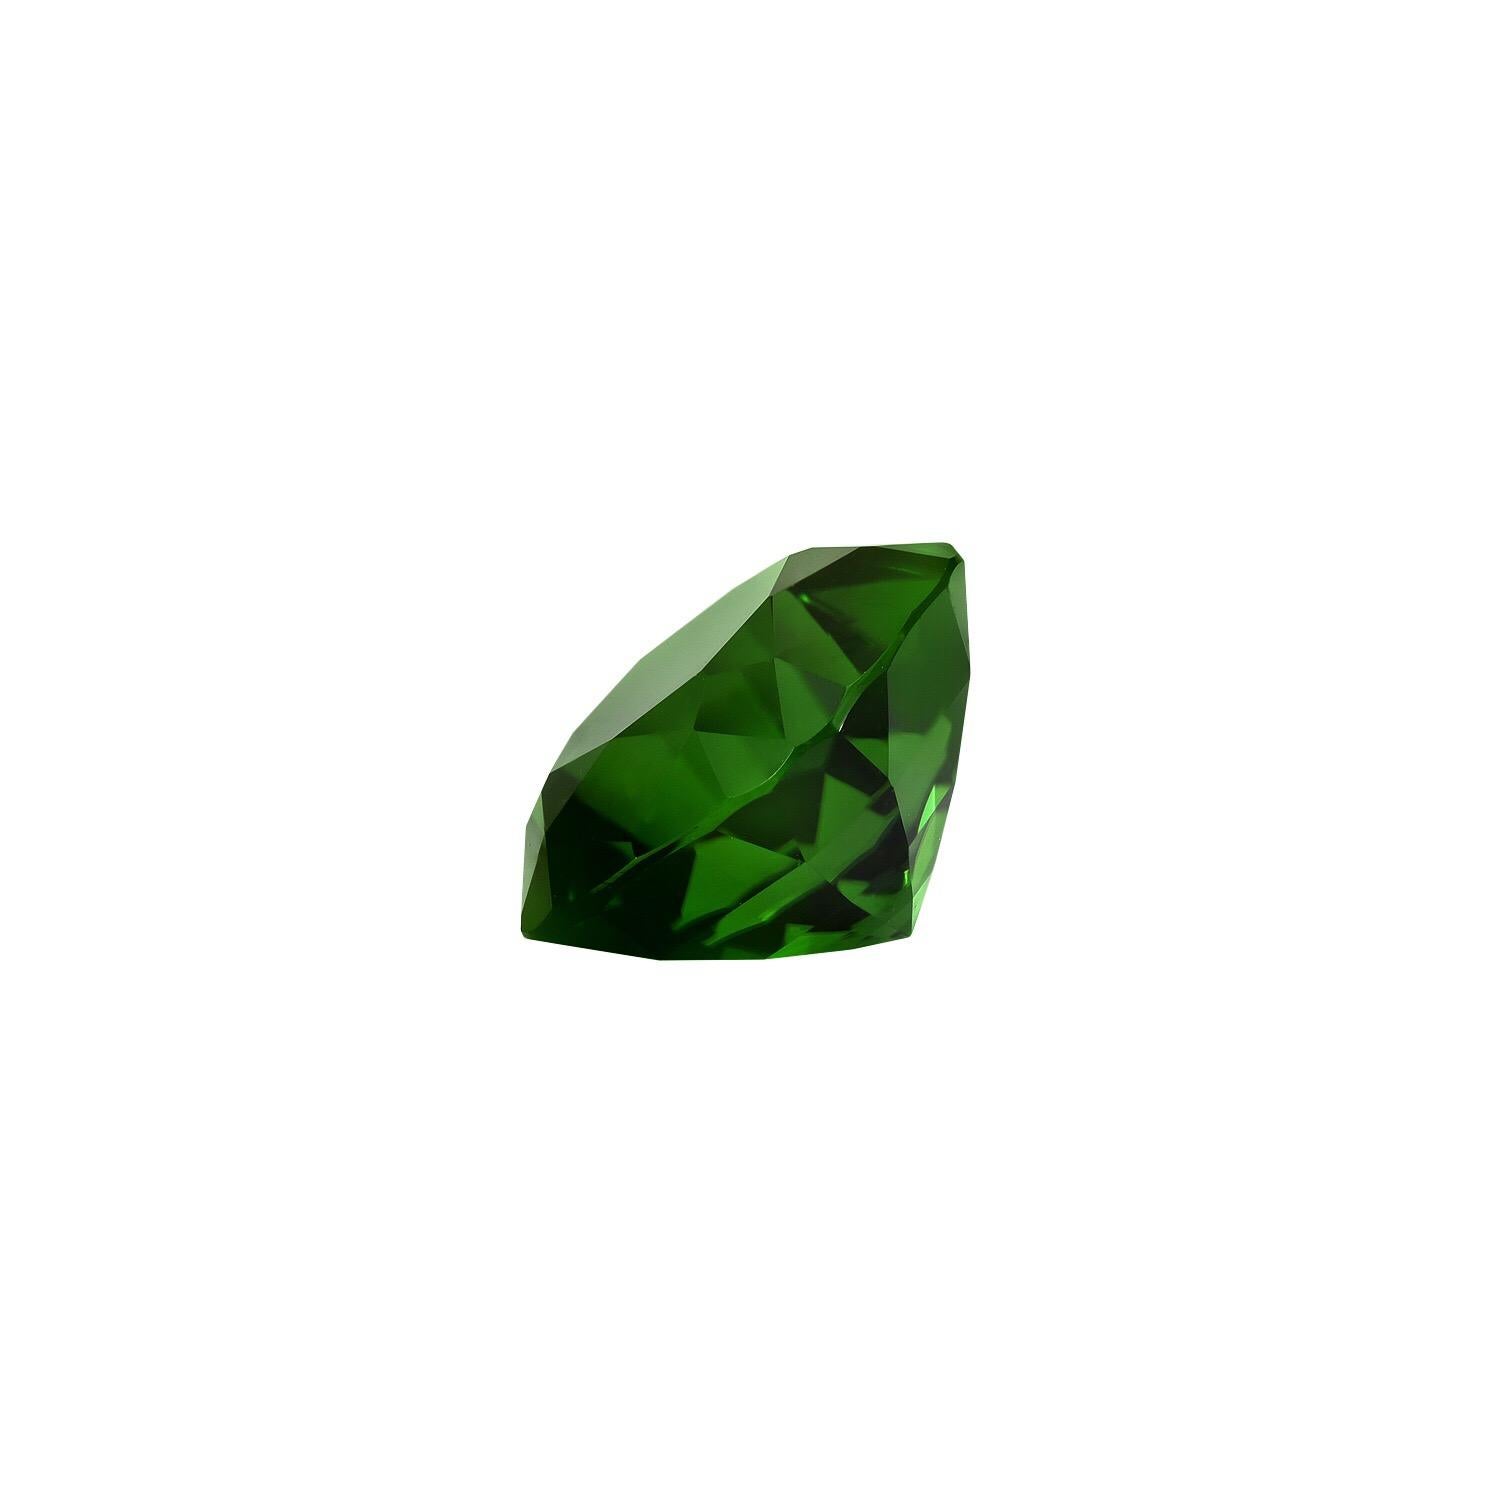 Natural, unheated, 3.30 carat vivid green Chrome Tourmaline cushion gem, offered loose.
We offer supreme custom jewelry work upon request. Please contact us for more details.
For your convenience we carry an extensive world-class loose gemstone